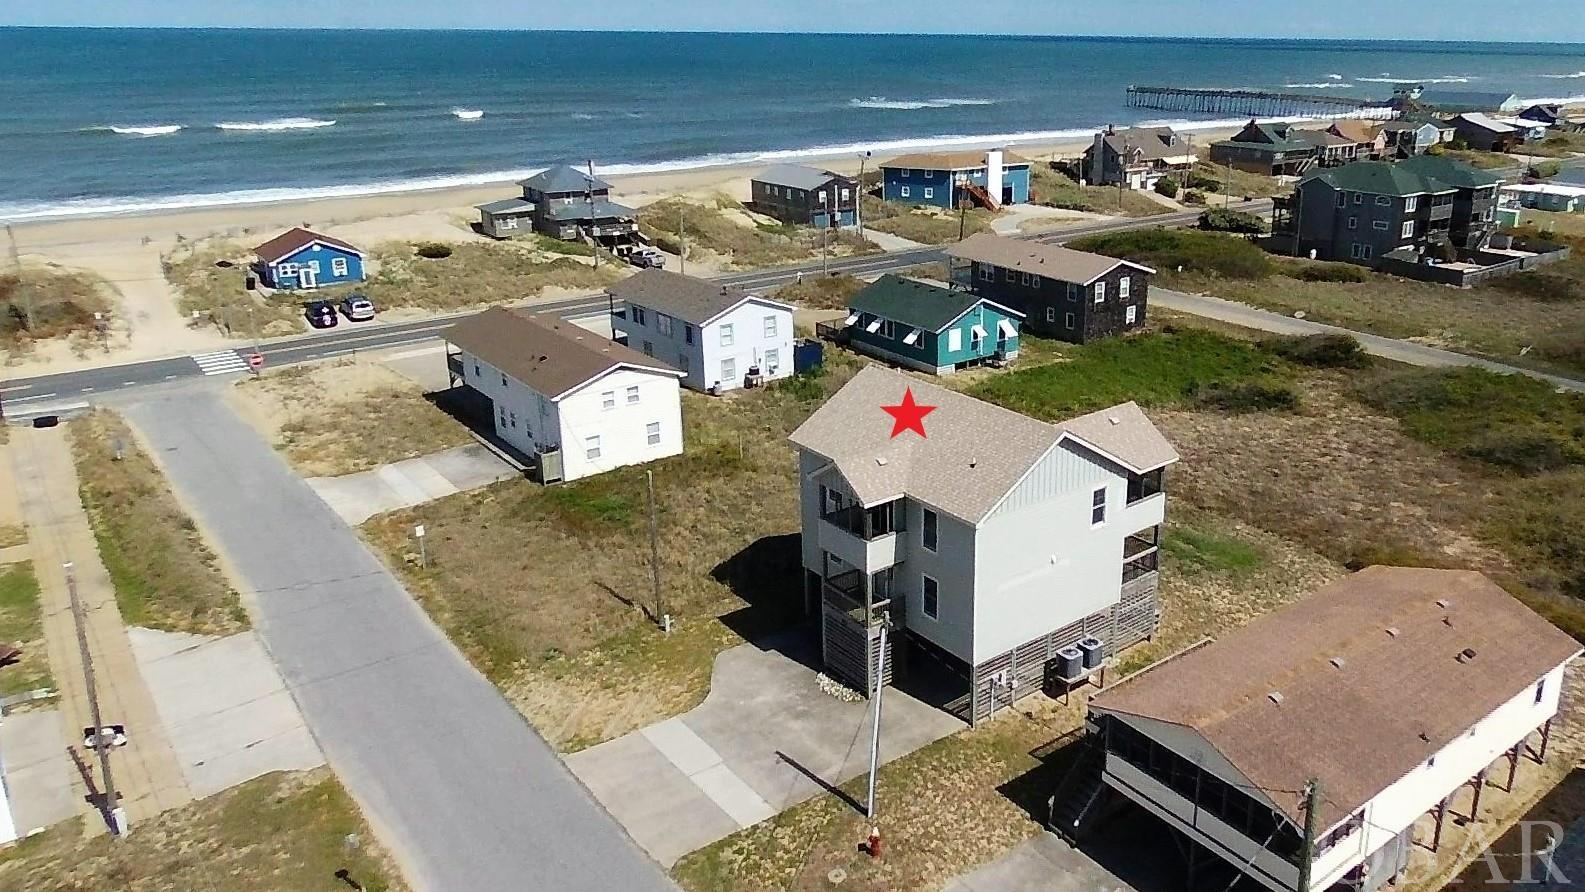 Multiple offers have been received.  All additional offers are requested to be submitted by noon on Tuesday May 3rd. Location, location, location.  This property located just 2 lots from the oceanfront is less than a minute walk to the beach.  The 3 bedroom, 3 bathroom house built in 2010 is the perfect 2nd home or investment short term rental on the beach. The layout is well thought out so that your family and guests will always have a space to relax in.  The first floor with dry entry has 2 master bedrooms on the oceanside of the house.  The West side of the house has a bedroom and an office/media room with a shared bathroom between the two rooms.  On the first floor you have front and back decks to enjoy the ocean breezes and salt air.  The back deck is prewired, reinforced and ready to add the hot tub of your choice.  The top side of the house offers spectacular ocean views from both the interior and decks.  The kitchen and dining area are located on the oceanside of the house, the vaulted ceiling and ocean views make this a great gathering spot for family and friends..  There is a living/family room located on the West side of the upstairs.  The sliding door from the living room leads out to the screened porch with picnic bench for outdoor dining.  The deck then extends towards the ocean and becomes a sundeck, great for after beach drinks or enjoying the sunrise over the ocean. There is also a front deck upstairs to enjoy the views from as well.  Upstairs is finished off with a half bathroom and large storage area/pantry that can double as an owner's lockup closet if needed.  The outdoor space of this house also has a lot to offer.  There is a large 14' X 8' dry storage under the house that can house all your beach and yard toys as well as an extra refrigerator for beach beverages.  Under the house you will also find the outdoor shower and another picnic bench for snacking and dining after the beach.  The backyard is a great space that would easily accommodate a fire pit, volleyball or bocce court.  Schedule your tour today and don't miss out on this opportunity to own on the Outer Banks.